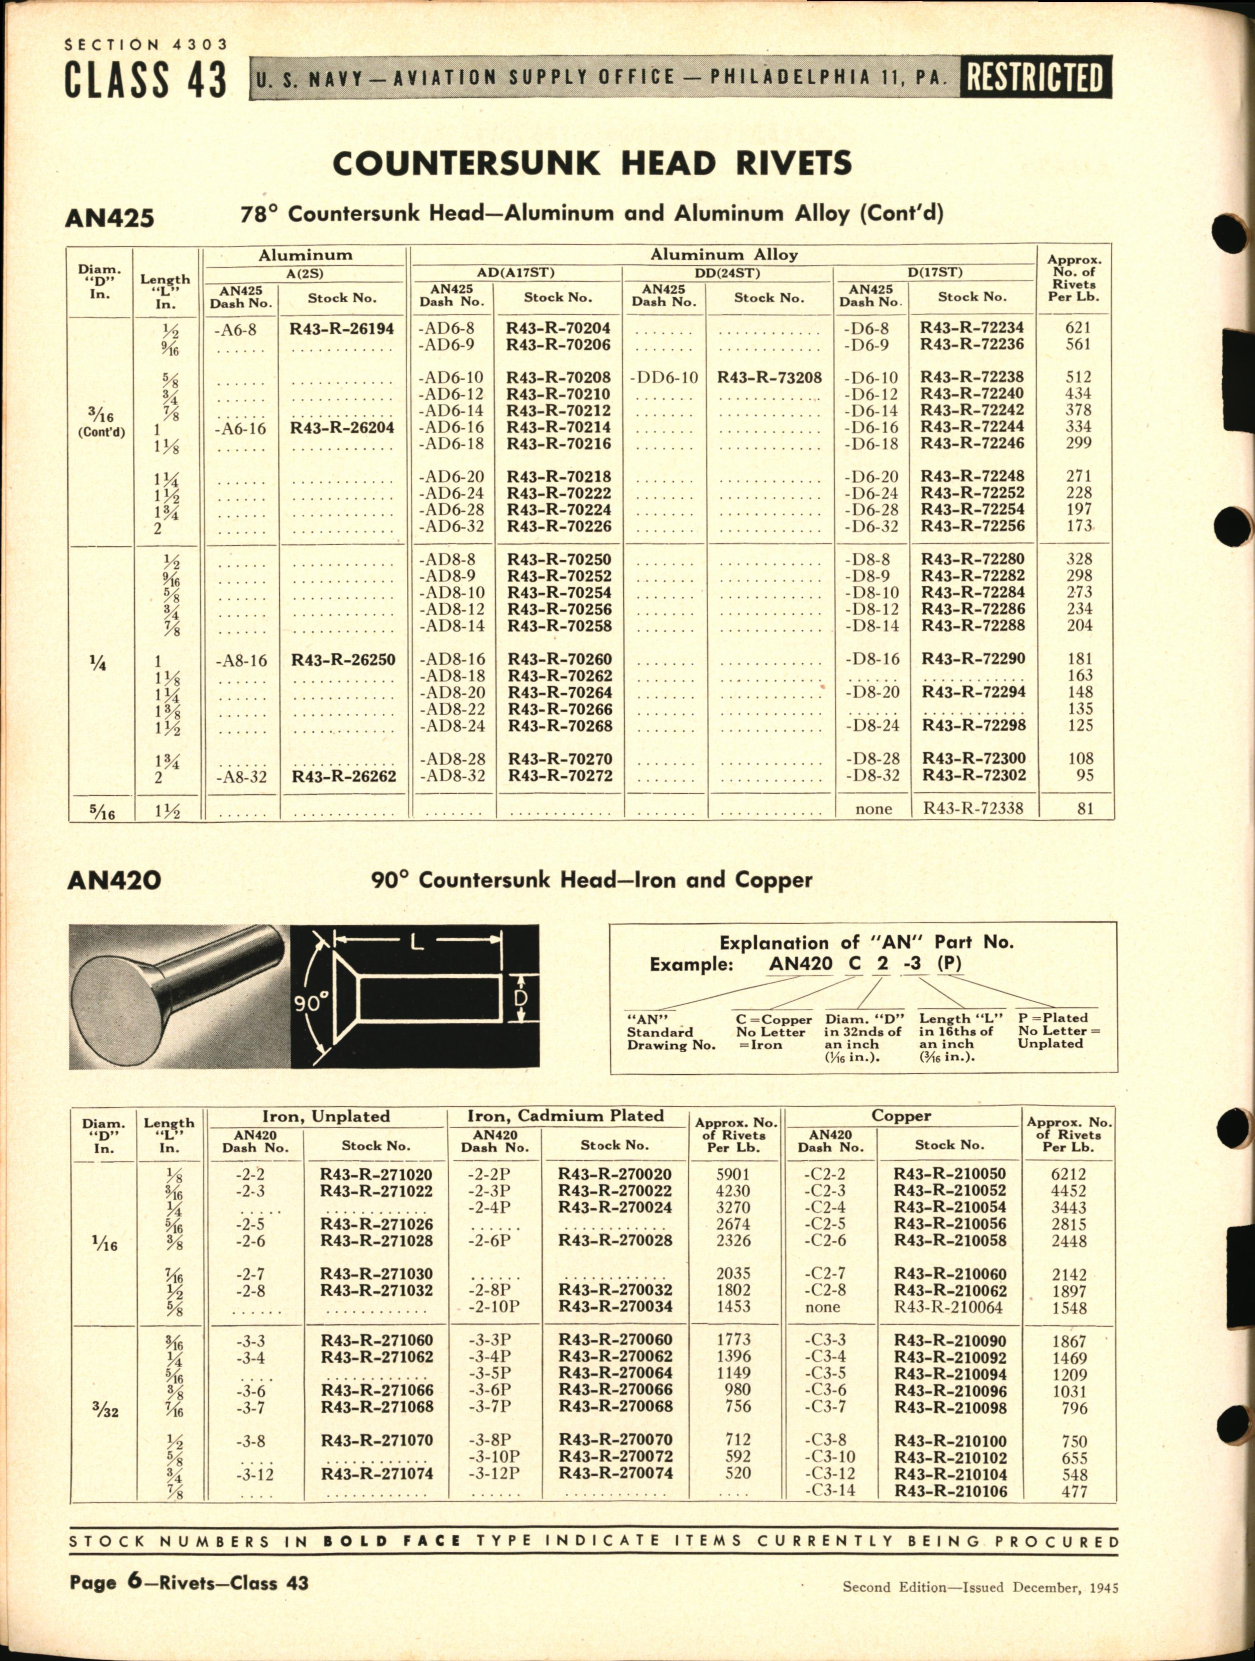 Sample page 6 from AirCorps Library document: Rivets  and Rivnuts